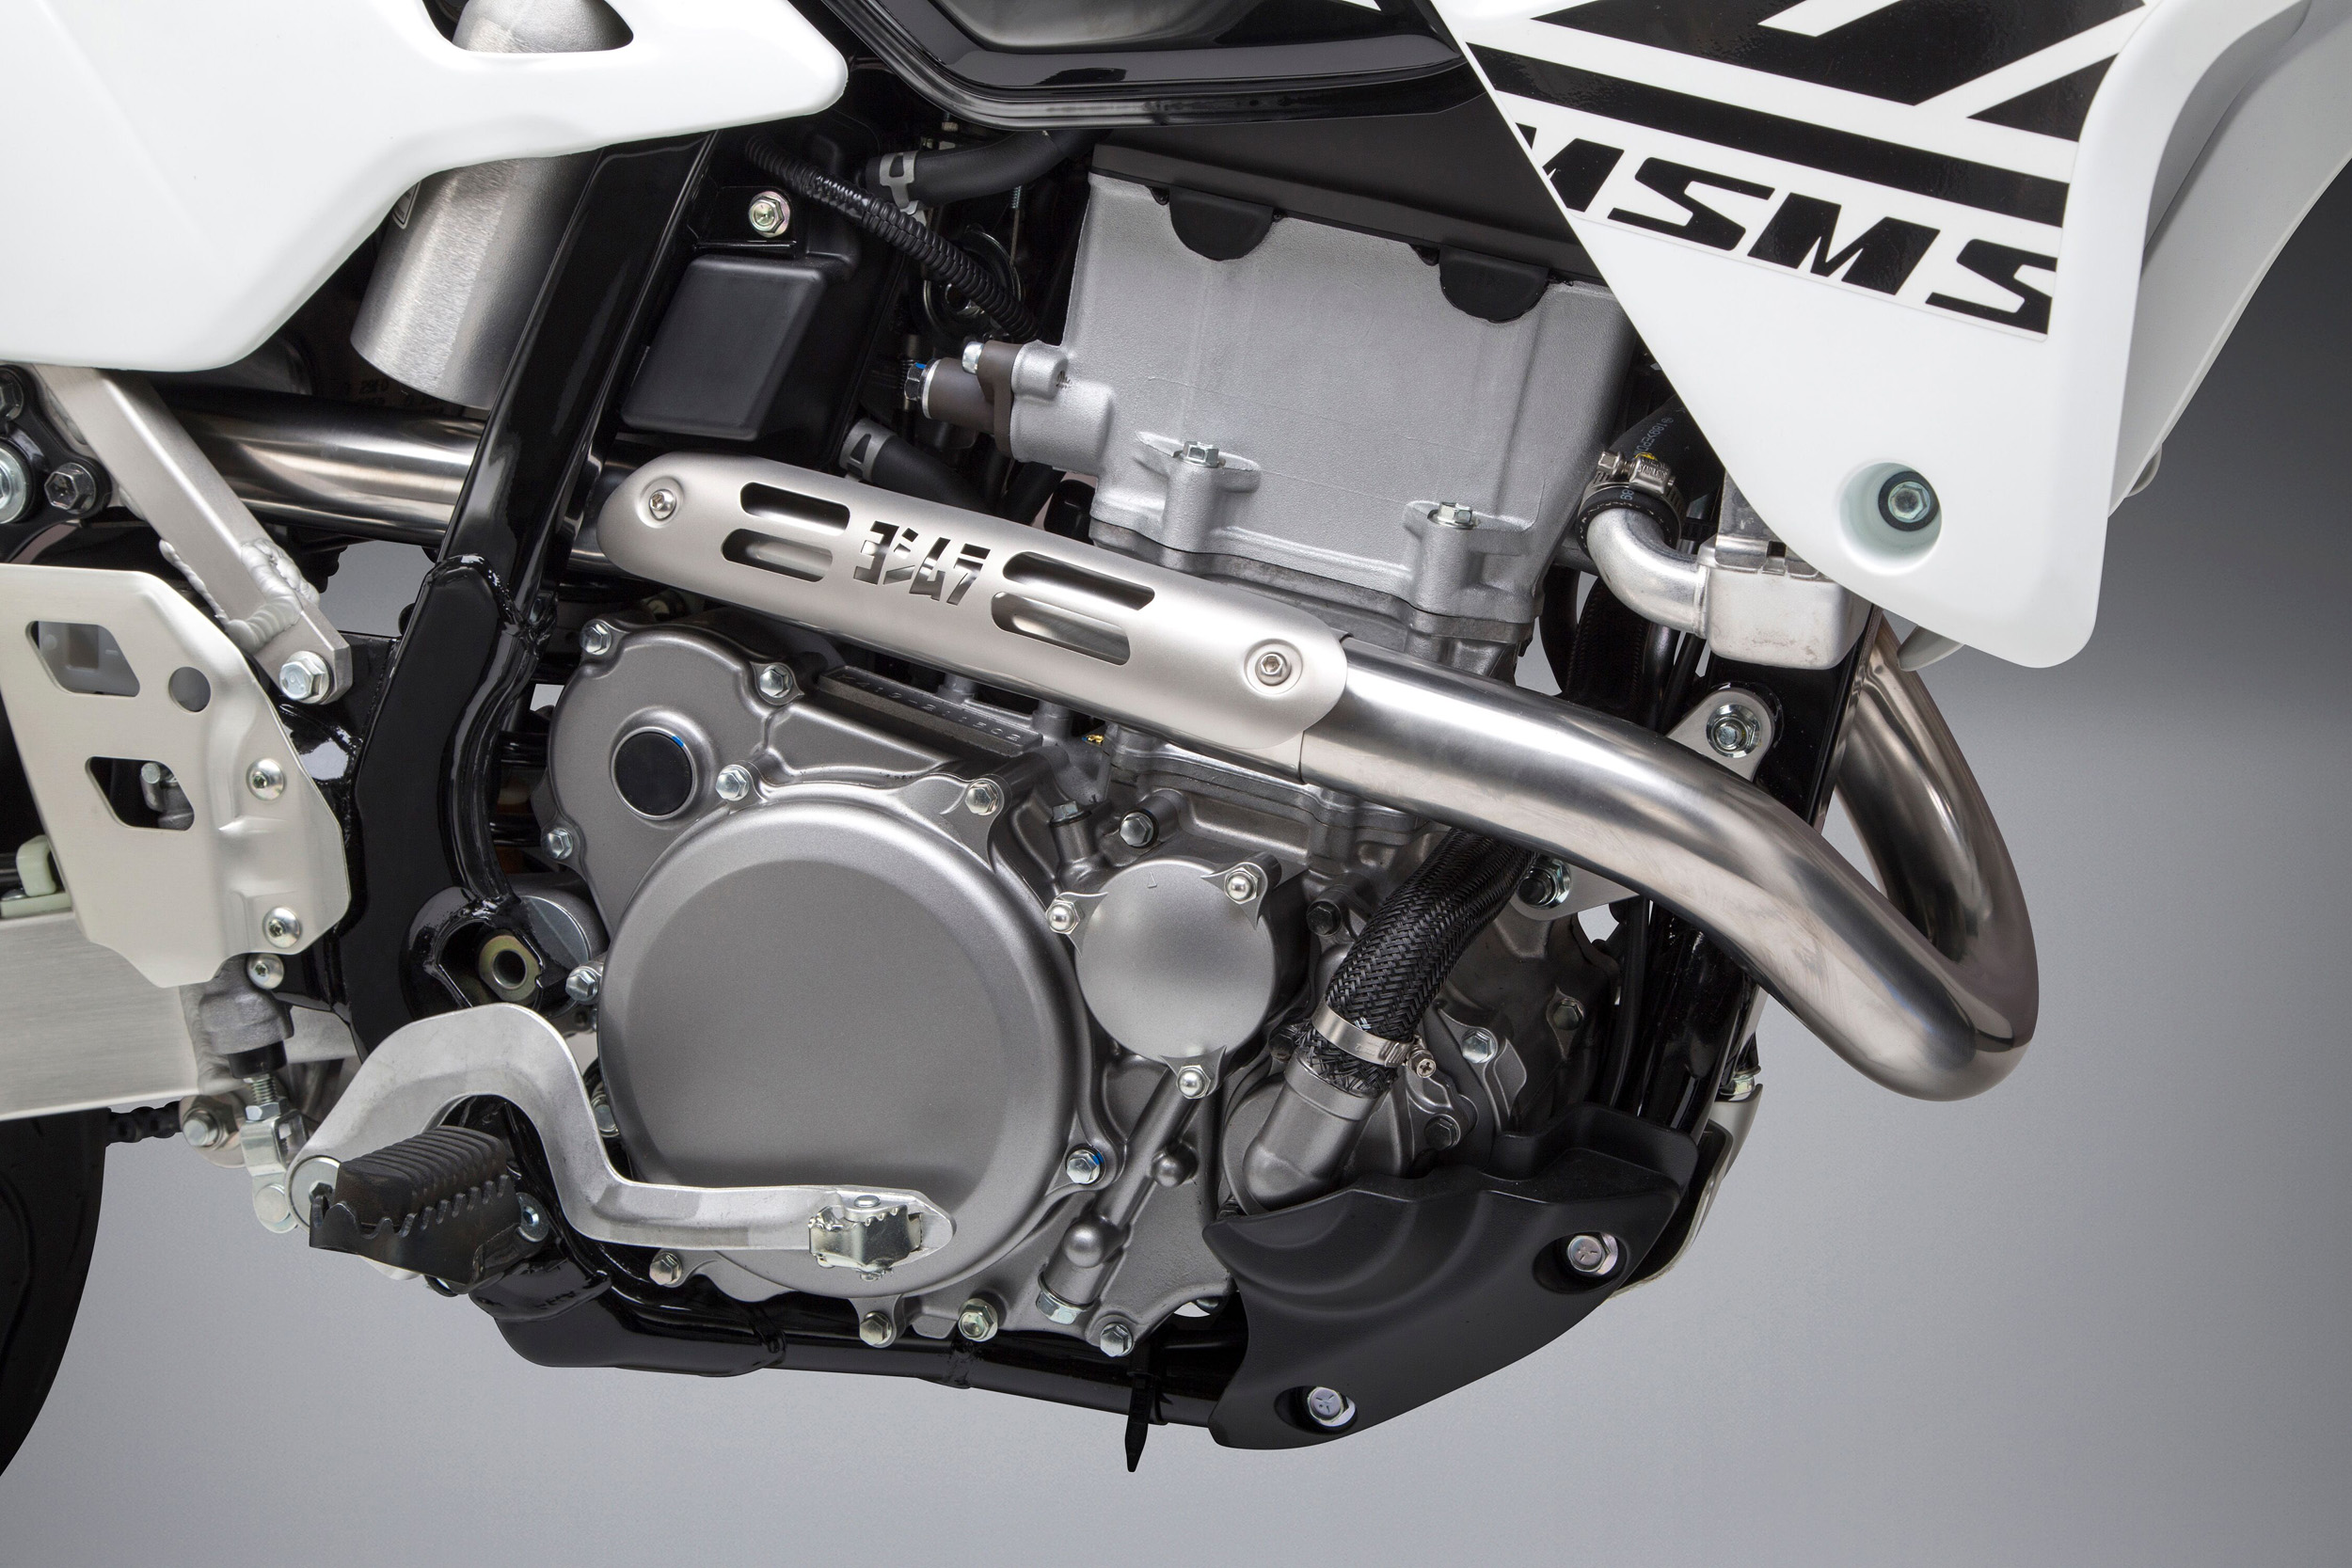 2019 Suzuki DR-Z 400 SM with Yoshimura RS-2 full system header and heat shield